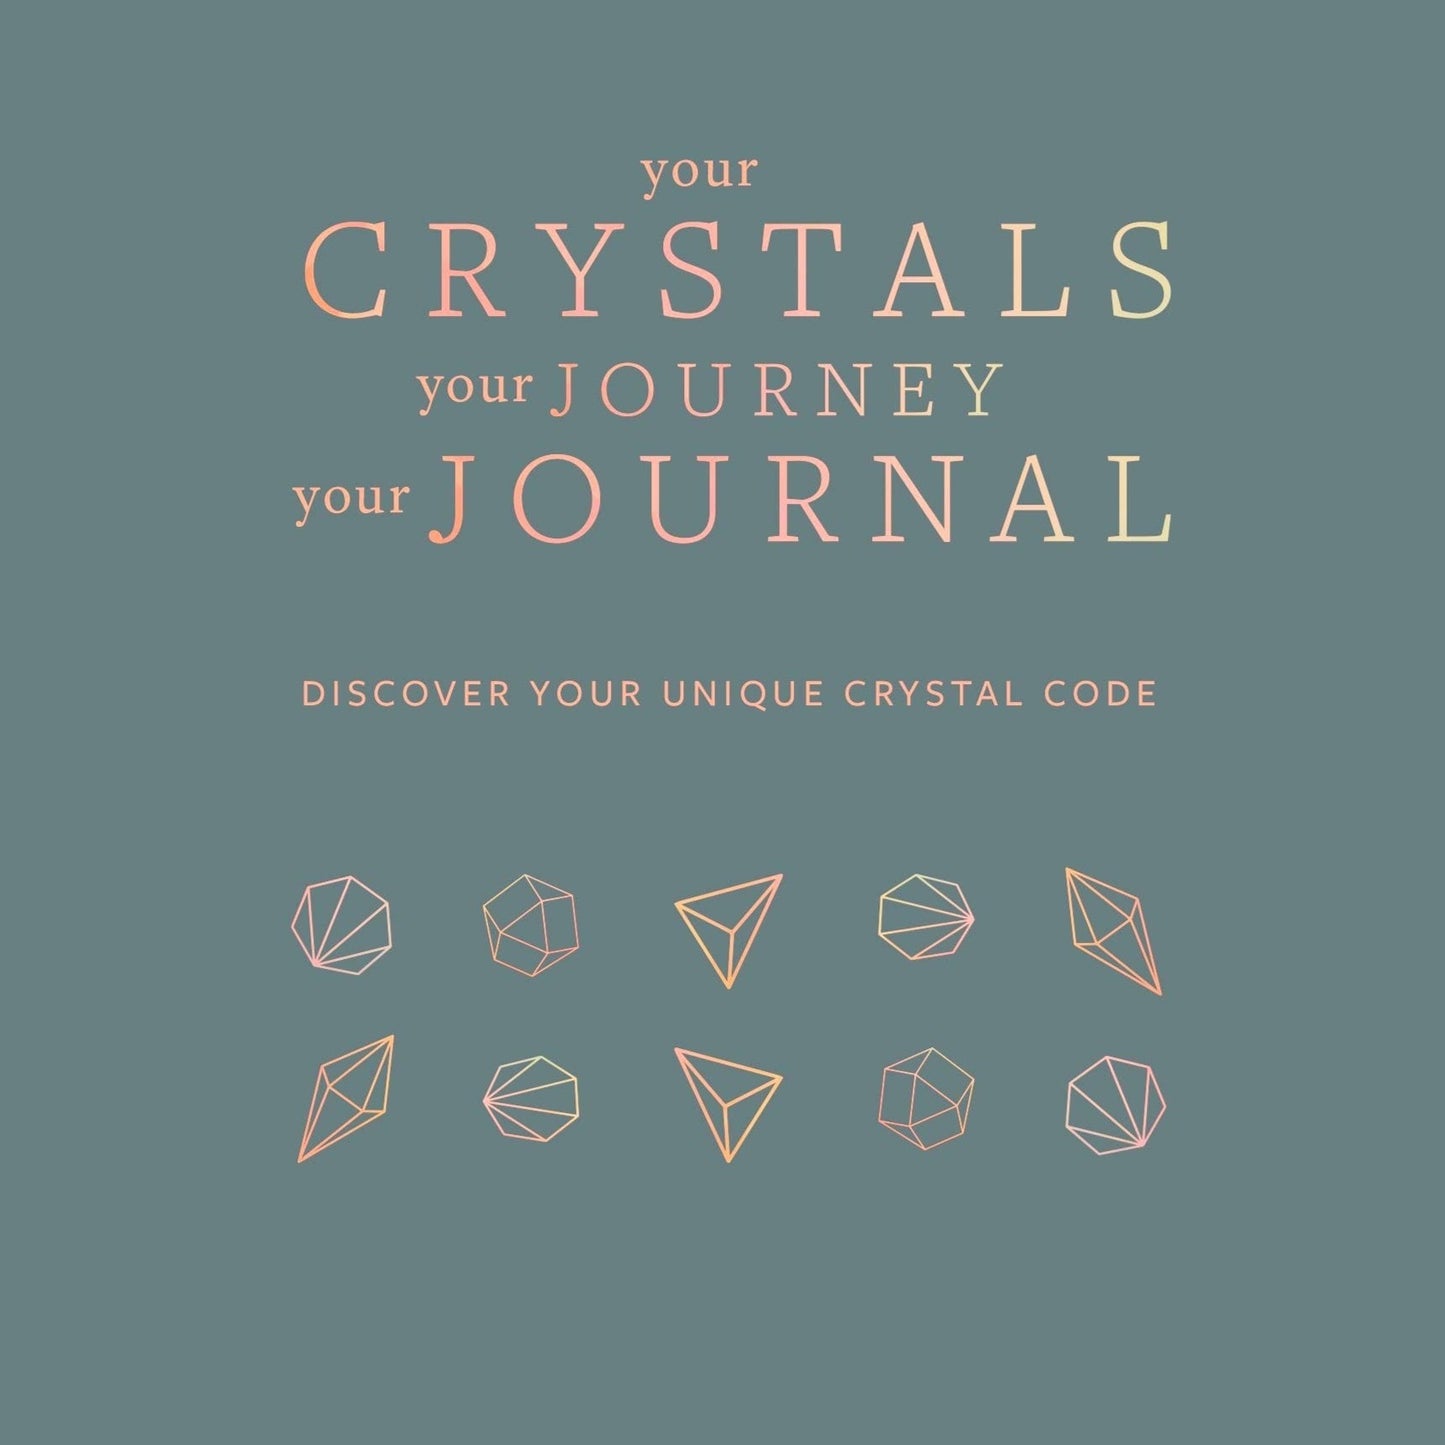 Your Crystals Your Journey Your Journal: Your Crystal Code